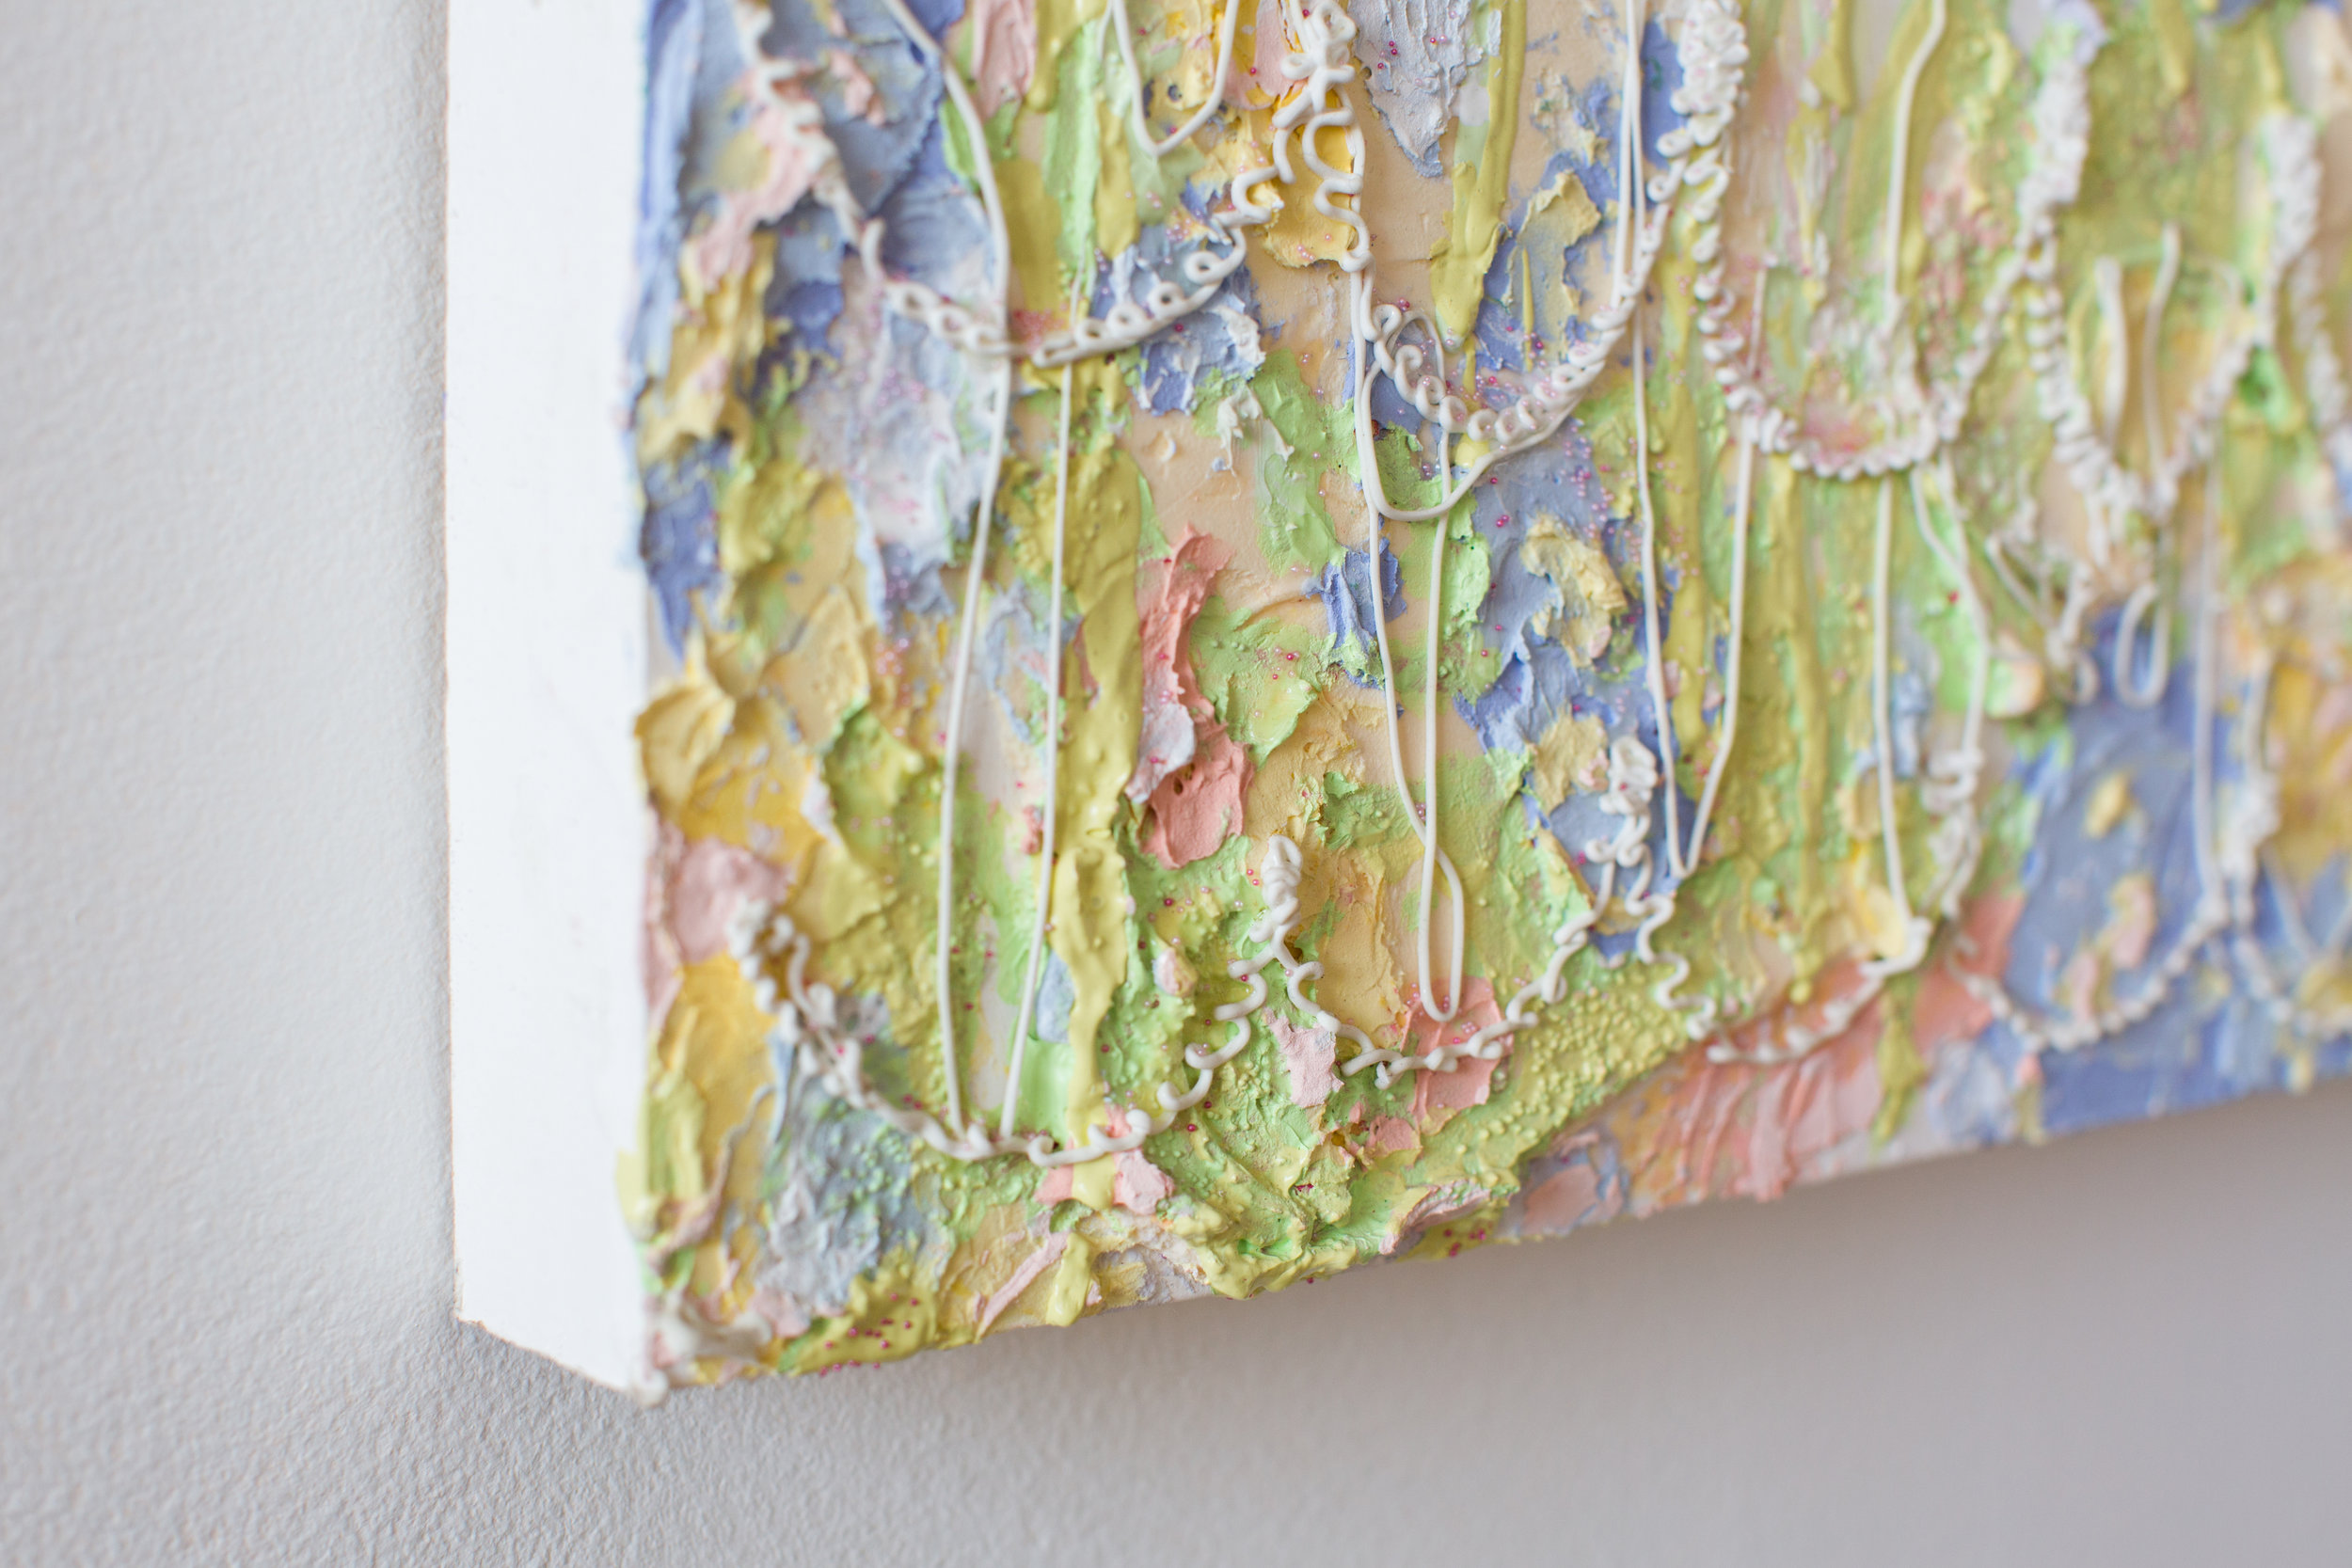   Abstract Color Experiment No. 1 (Detail)   Mixed Media on Board  2013  Photo:  Julie Dietz Photography  